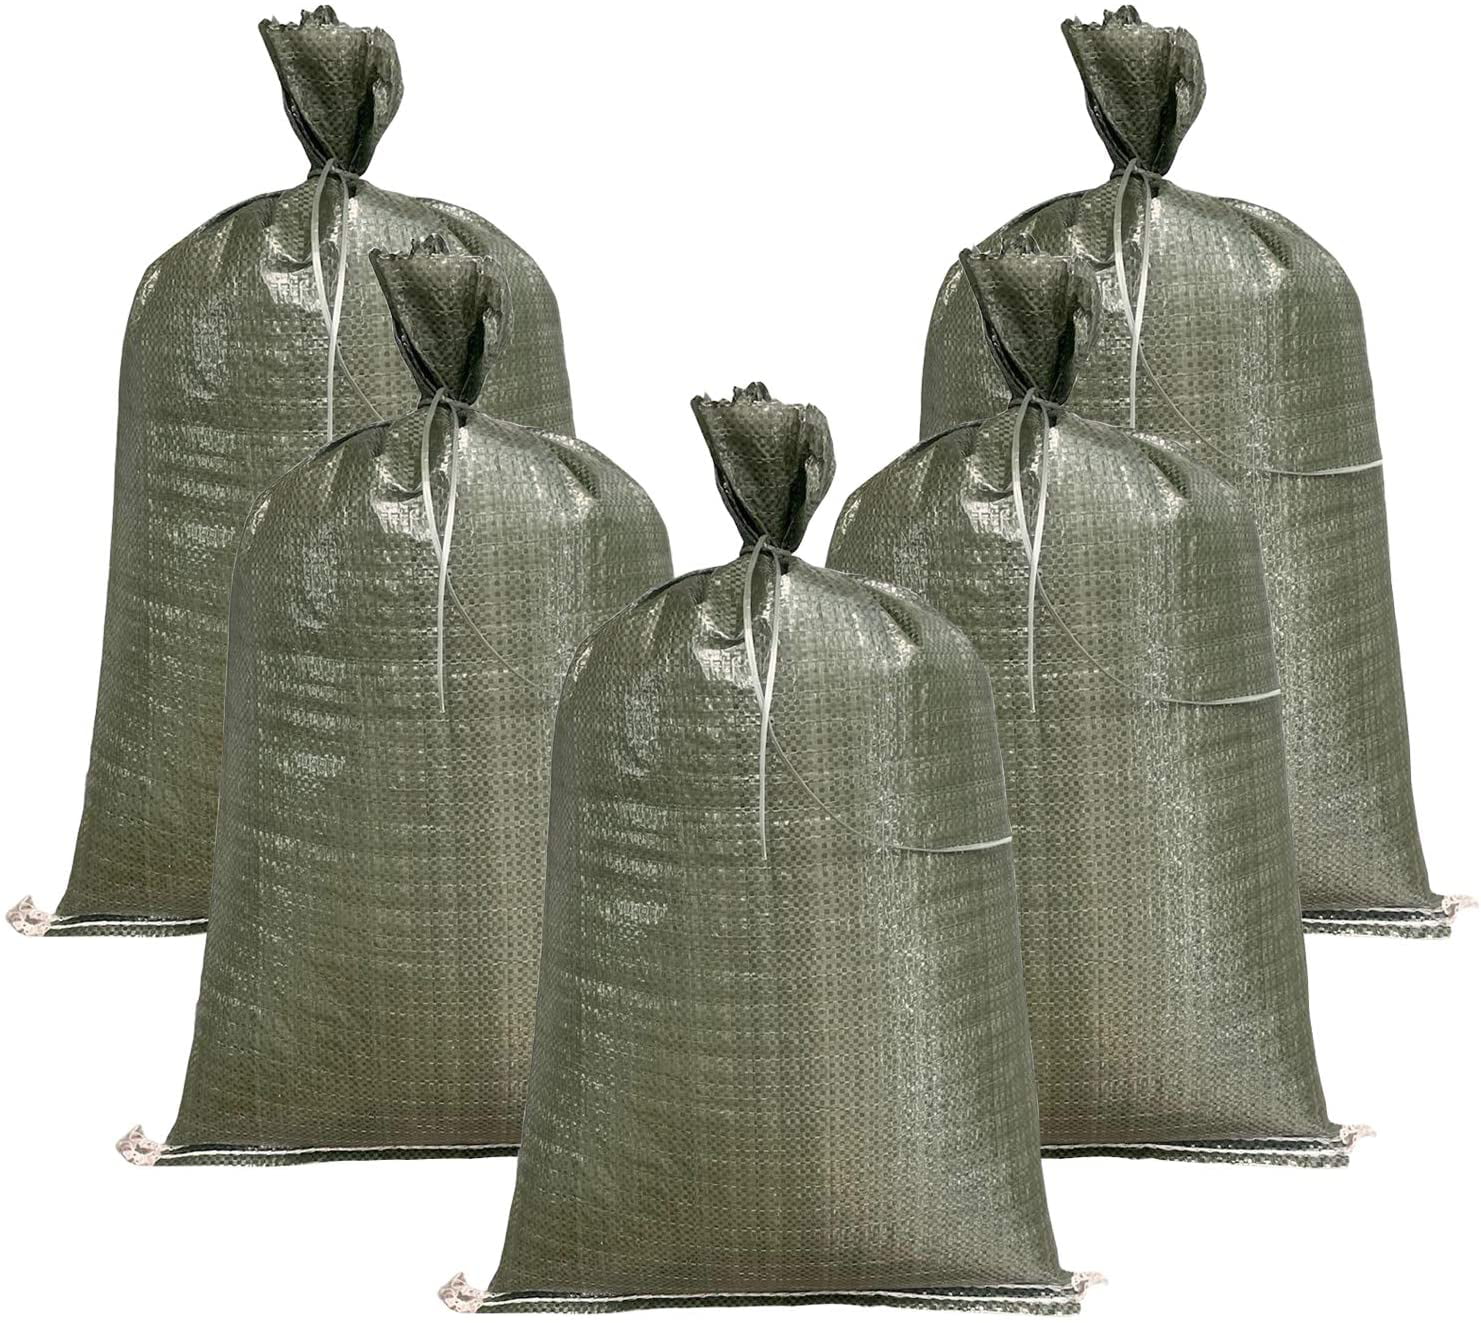 AK TRADING CO Tent Sandbags Flood Water Barrier TAN 14 x 26 Poly Sandbags W/UV Protection & Built-in Ties Pack of 50 